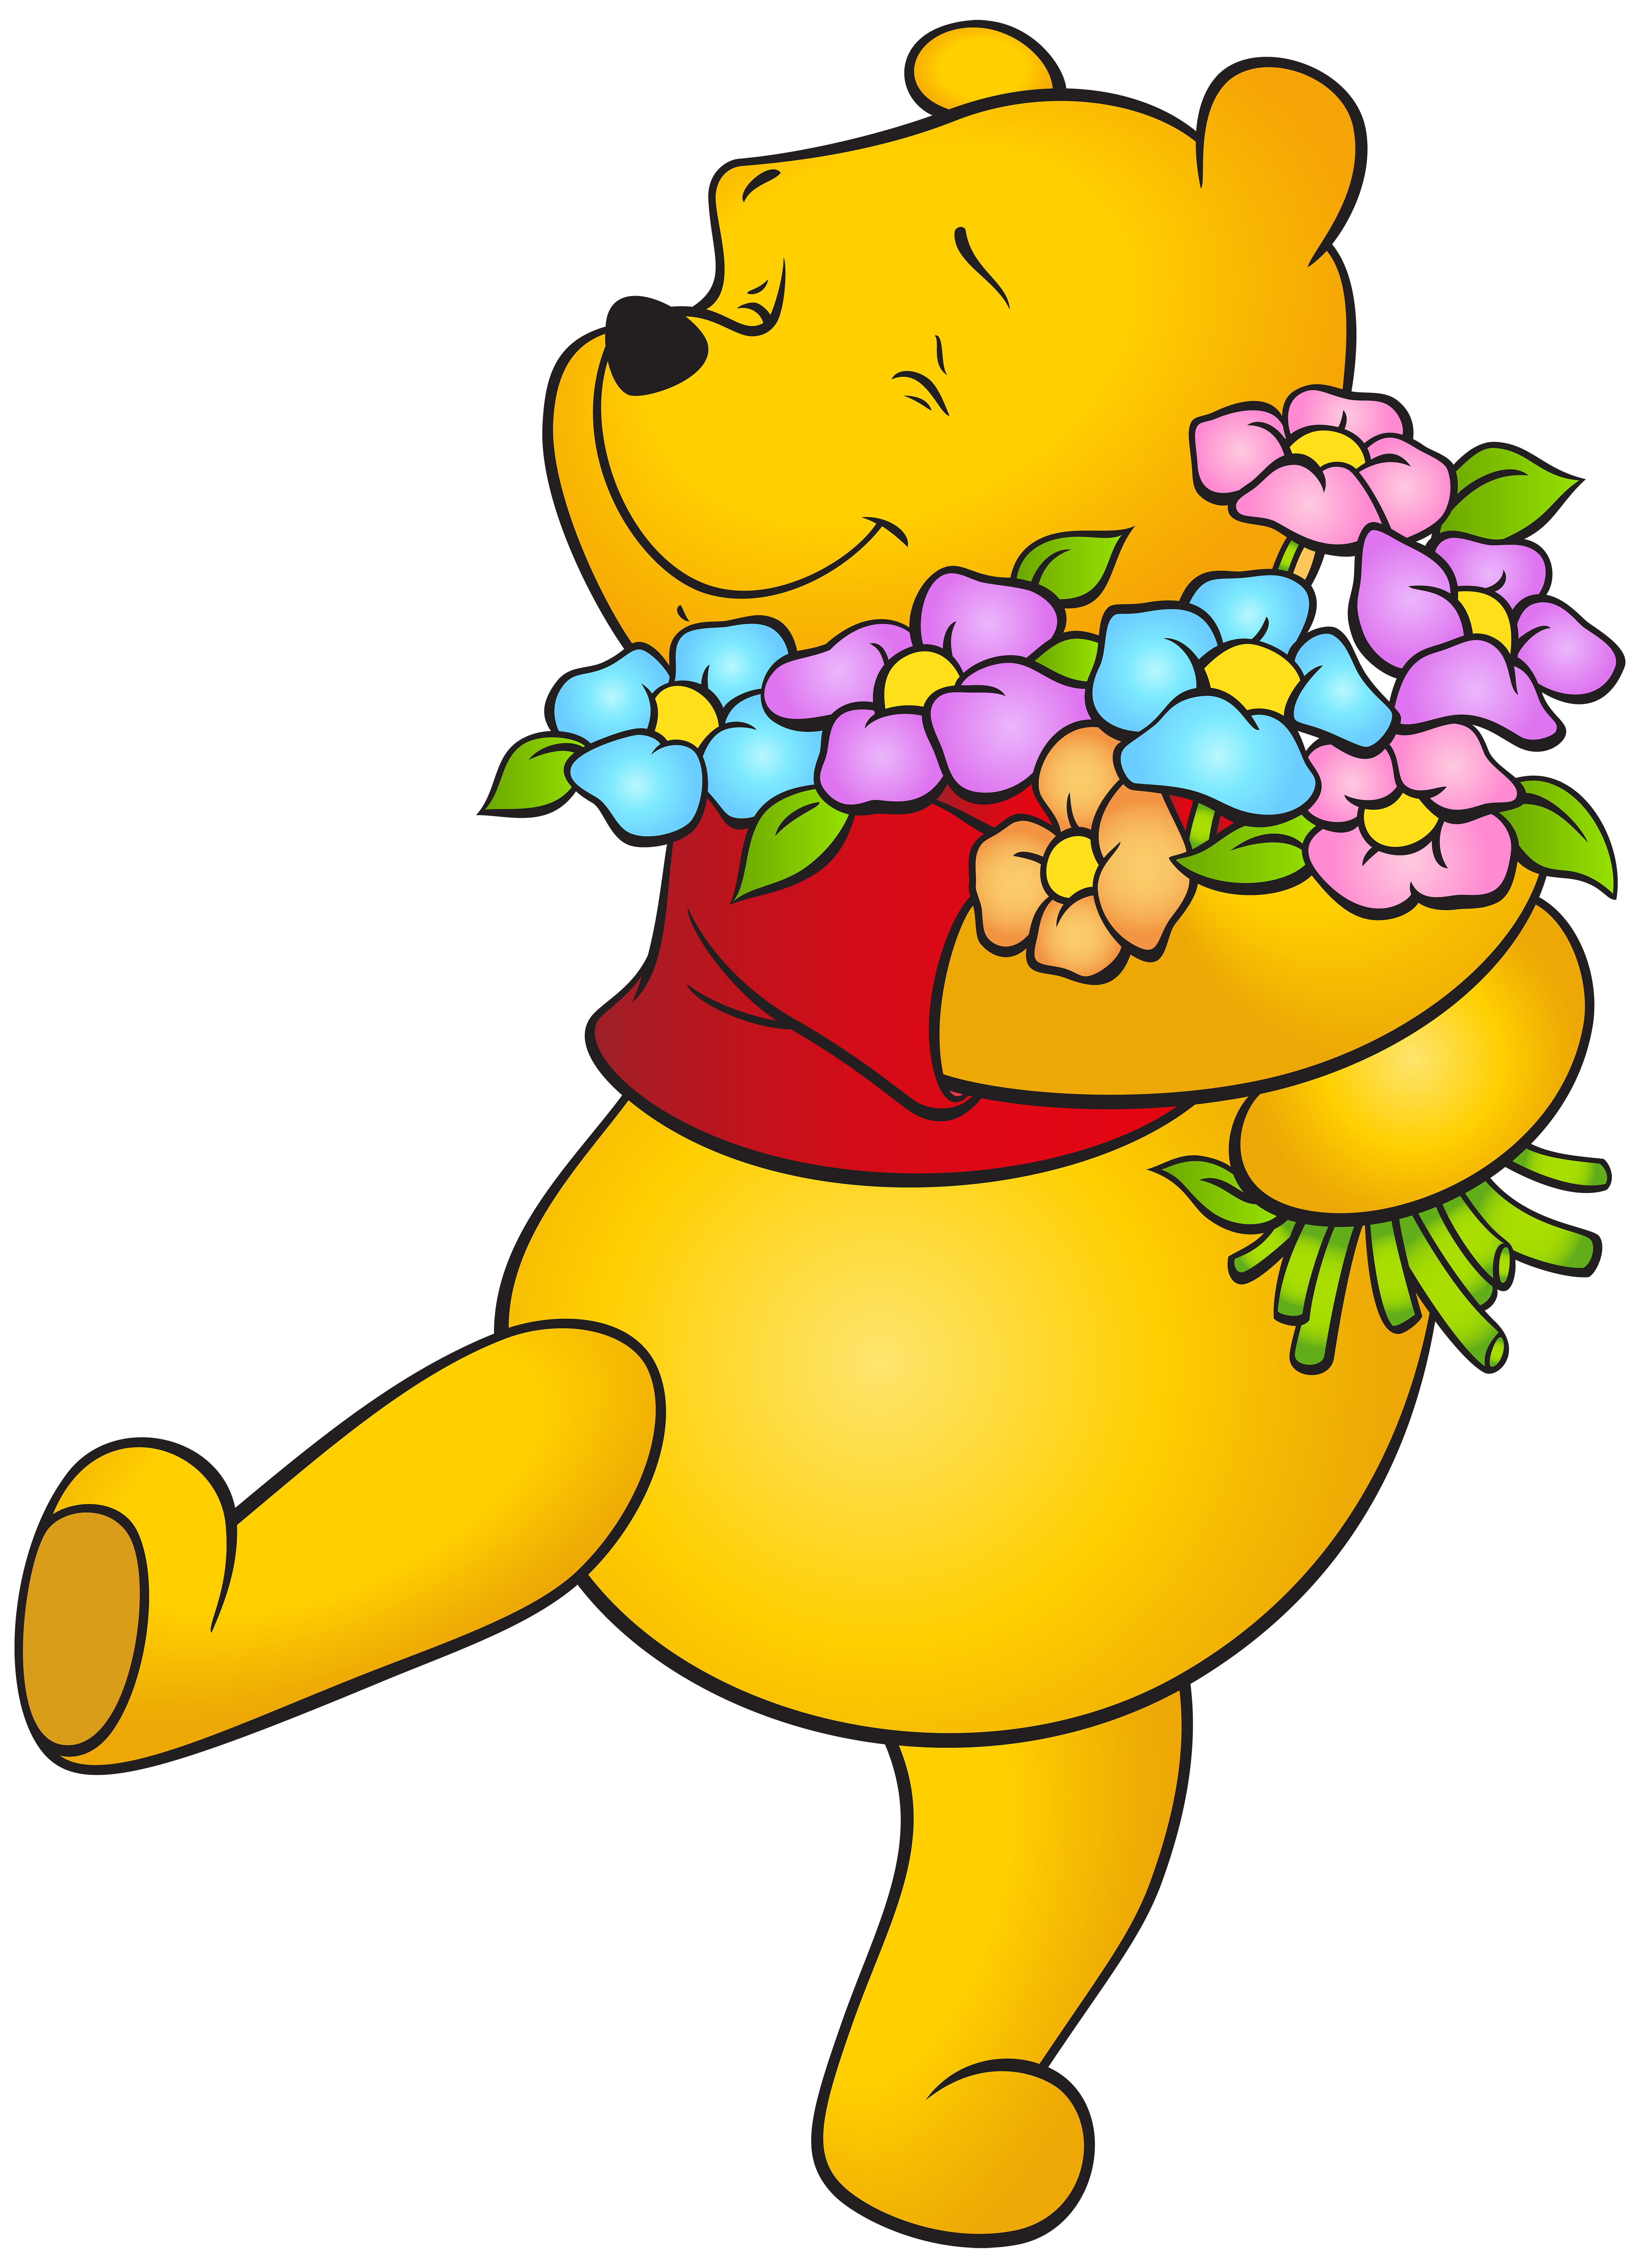 Winnie the Pooh with Flowers Free PNG Clip Art Image.